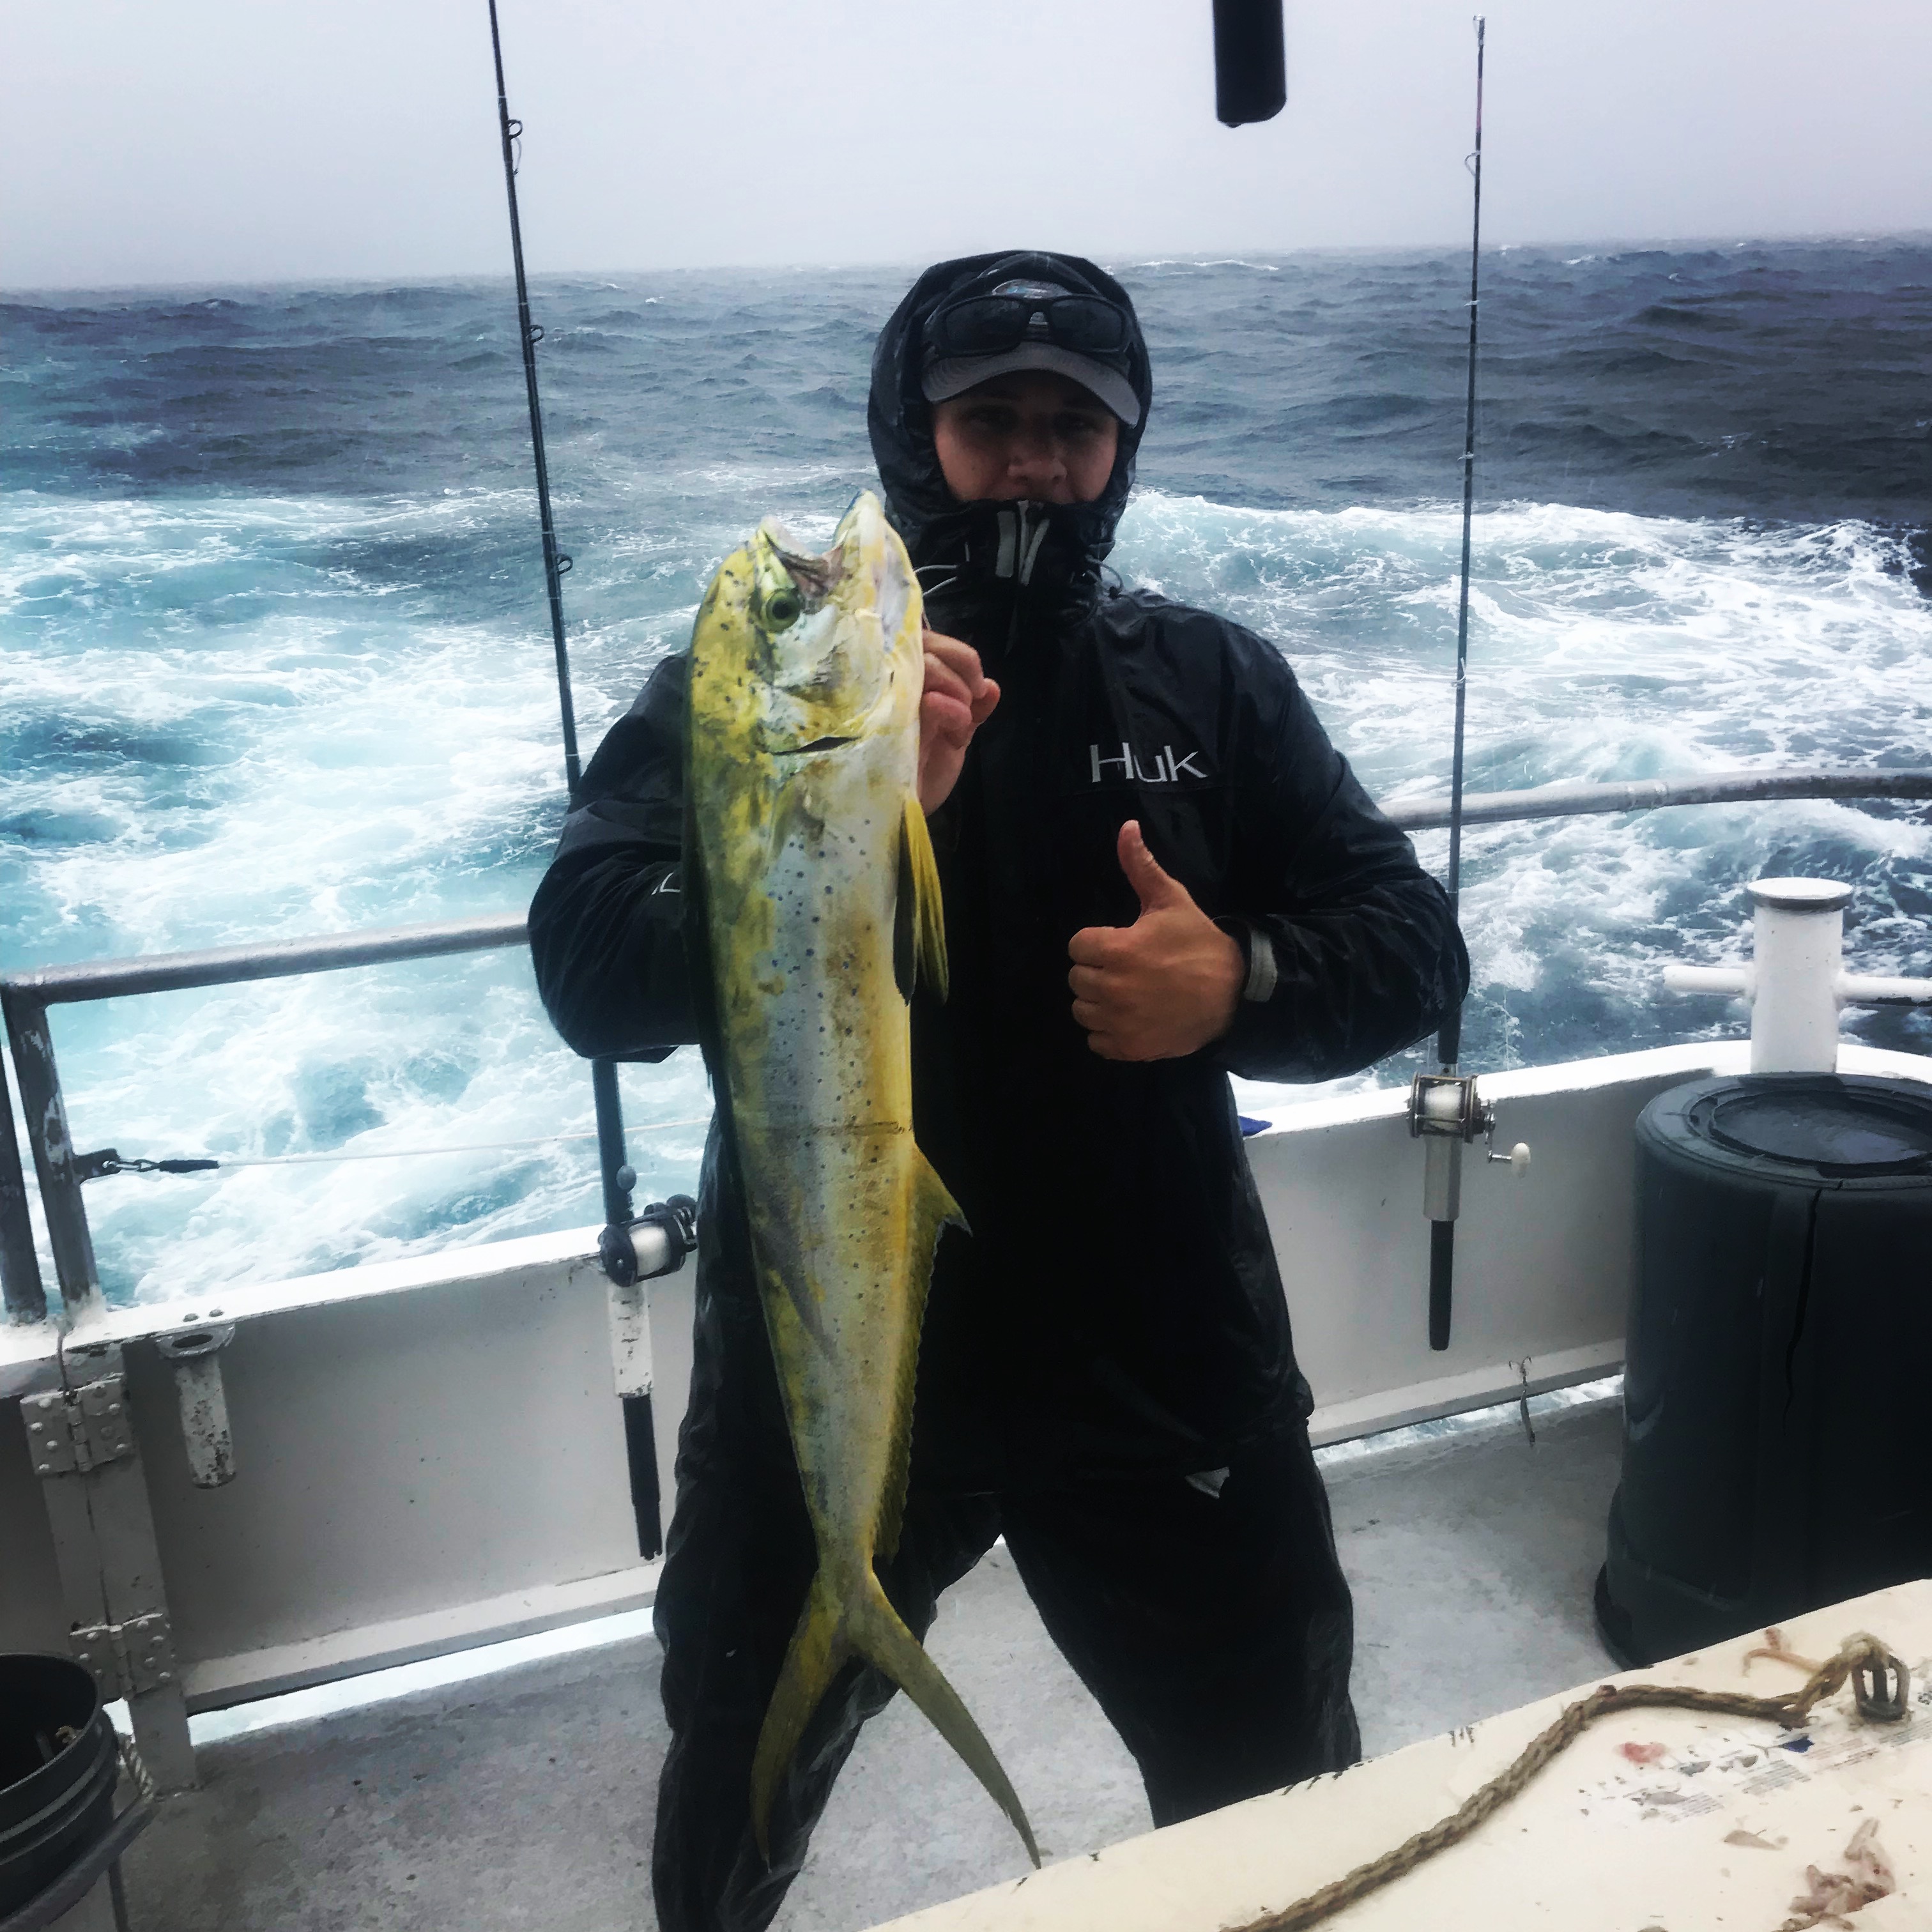 https://www.fishheadquarters.com/wp-content/uploads/2017/11/Evan-with-a-nice-dolphin-caught-on-a-rainy-day-aboard-Catch-My-Drift.jpg